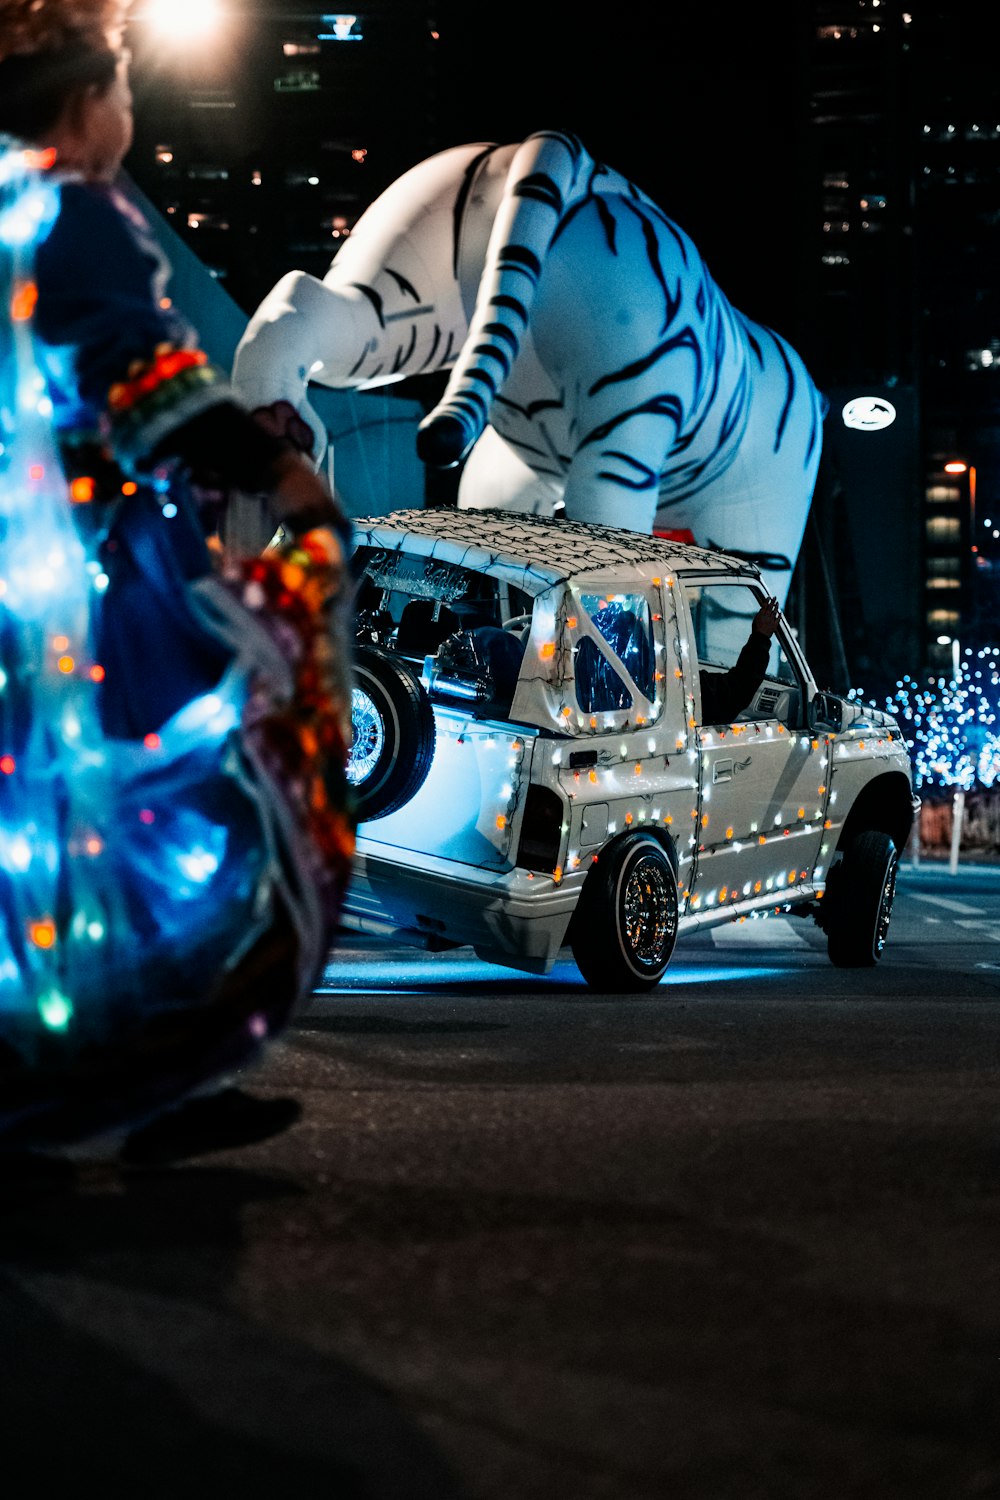 a white tiger car driving down a street at night